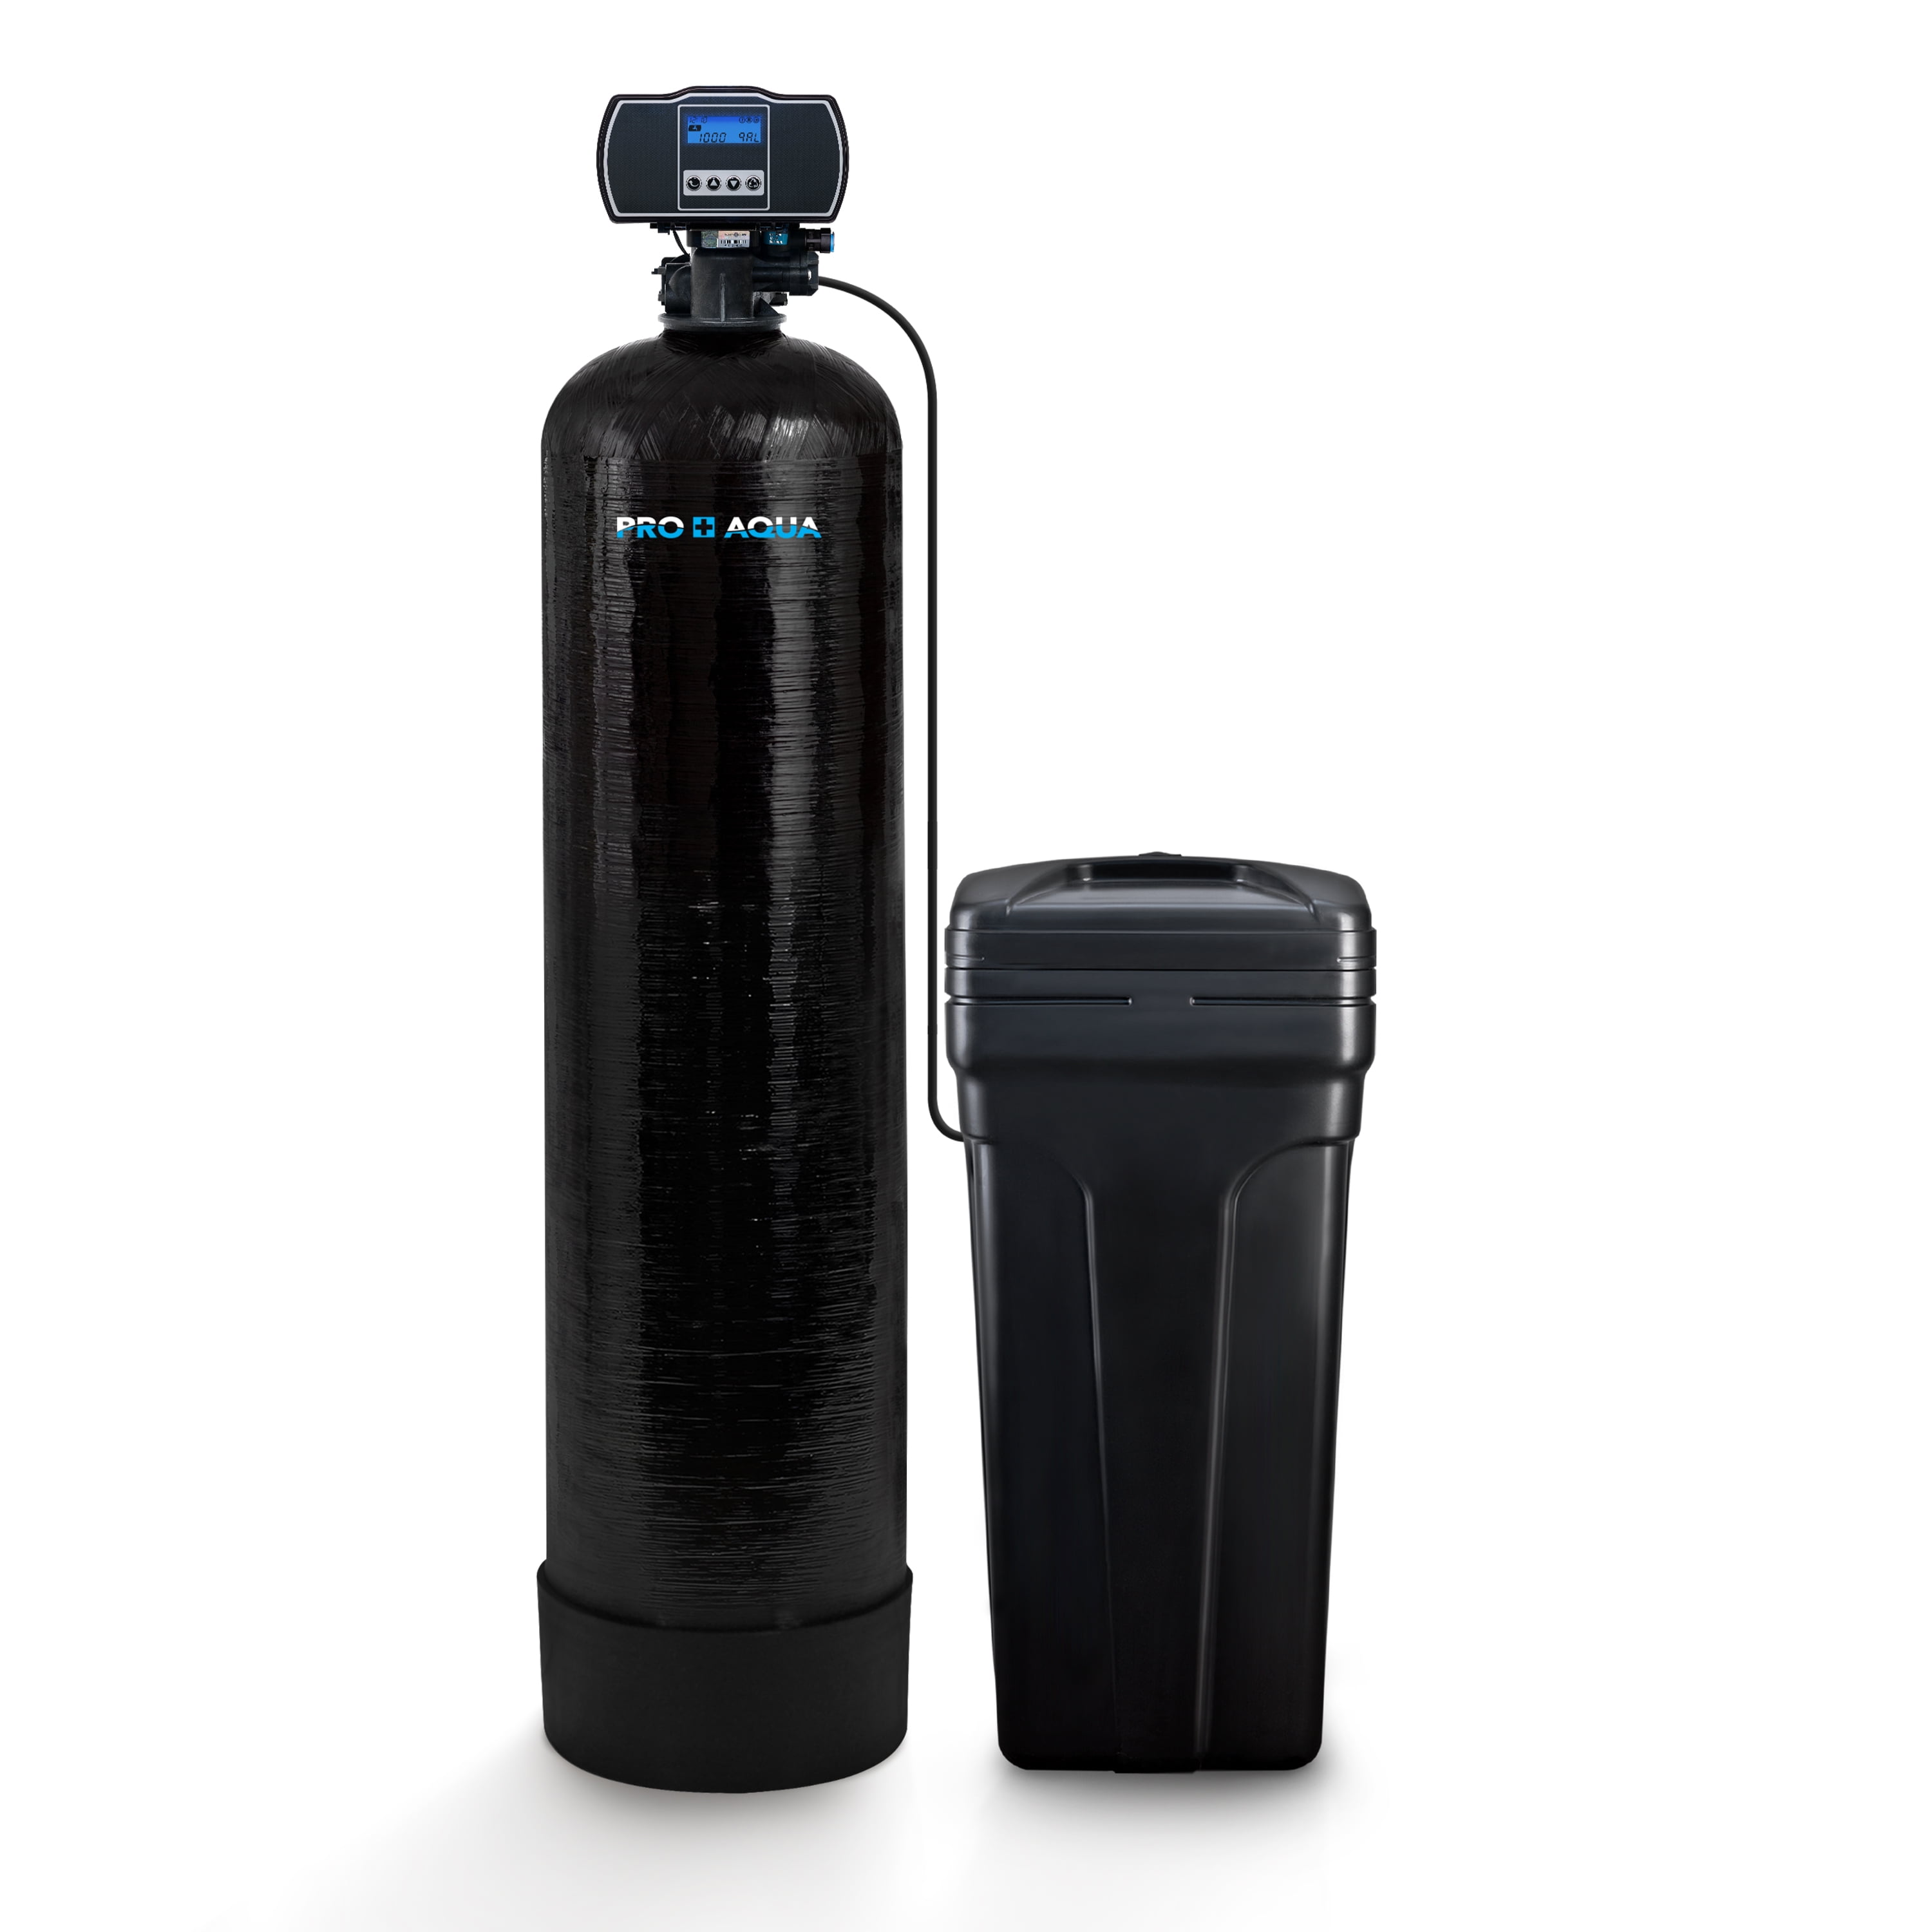 ON THE GO PORTABLE WATER SOFTENERS CH30317-2010103-30 MARINE BOAT